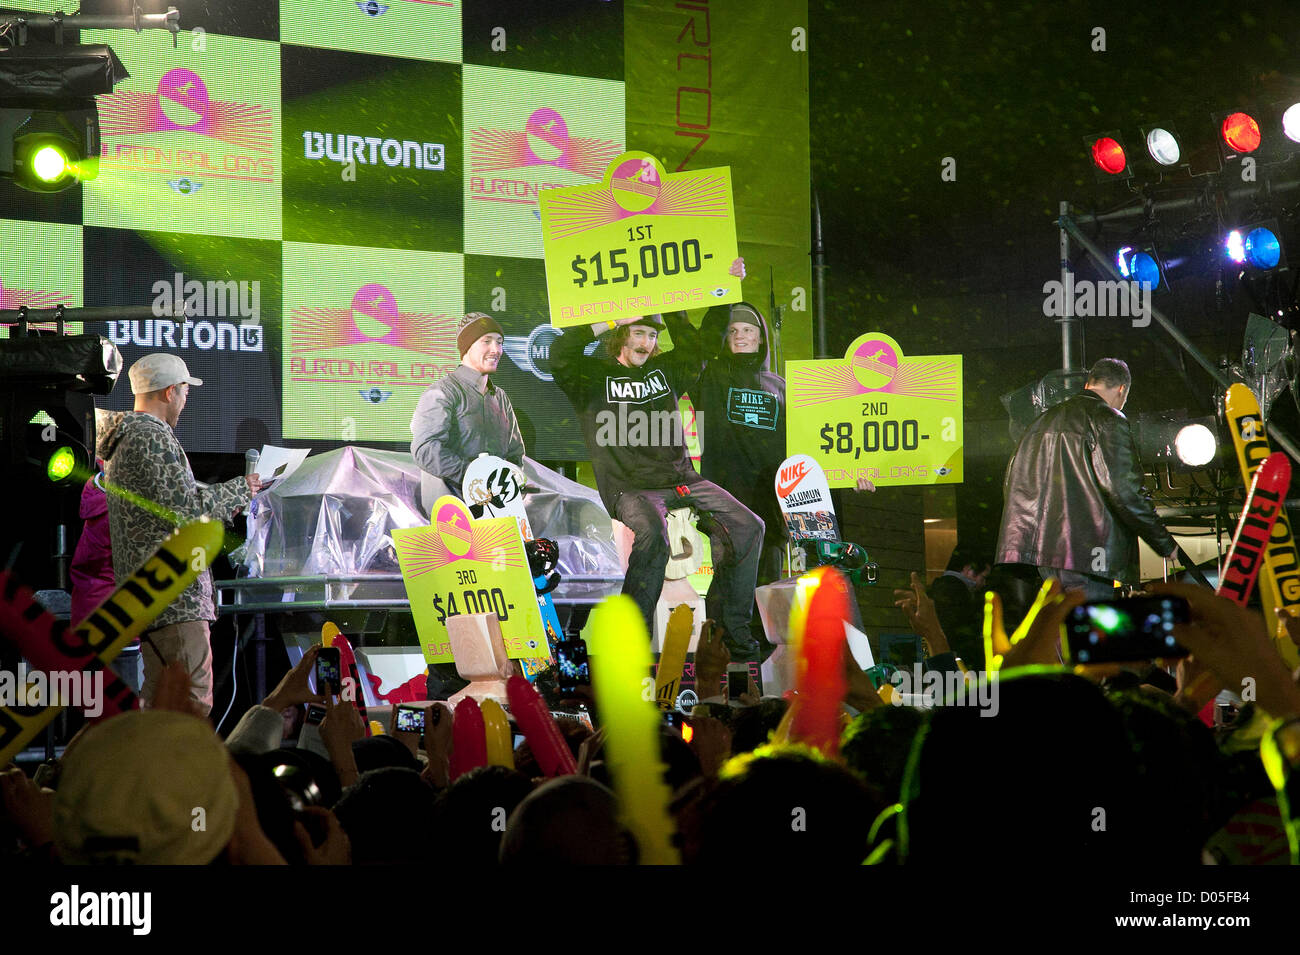 November 17, 2012, Tokyo, Japan - (L to R) Johan Owen, Forest Bailey and Jaime Nicholls, the top 3 of the snowboarding competition celebrate their victory during the 'BURTON RAIL DAYS presented by MINI' competition, the biggest street snowboarding contest in downtown Tokyo. The world's top pro snowboarders came together to perform various tricks on handrails and ledges during this event at the Roppongi Hills Arena. (Photo by Rodrigo Reyes Marin/AFLO) Stock Photo